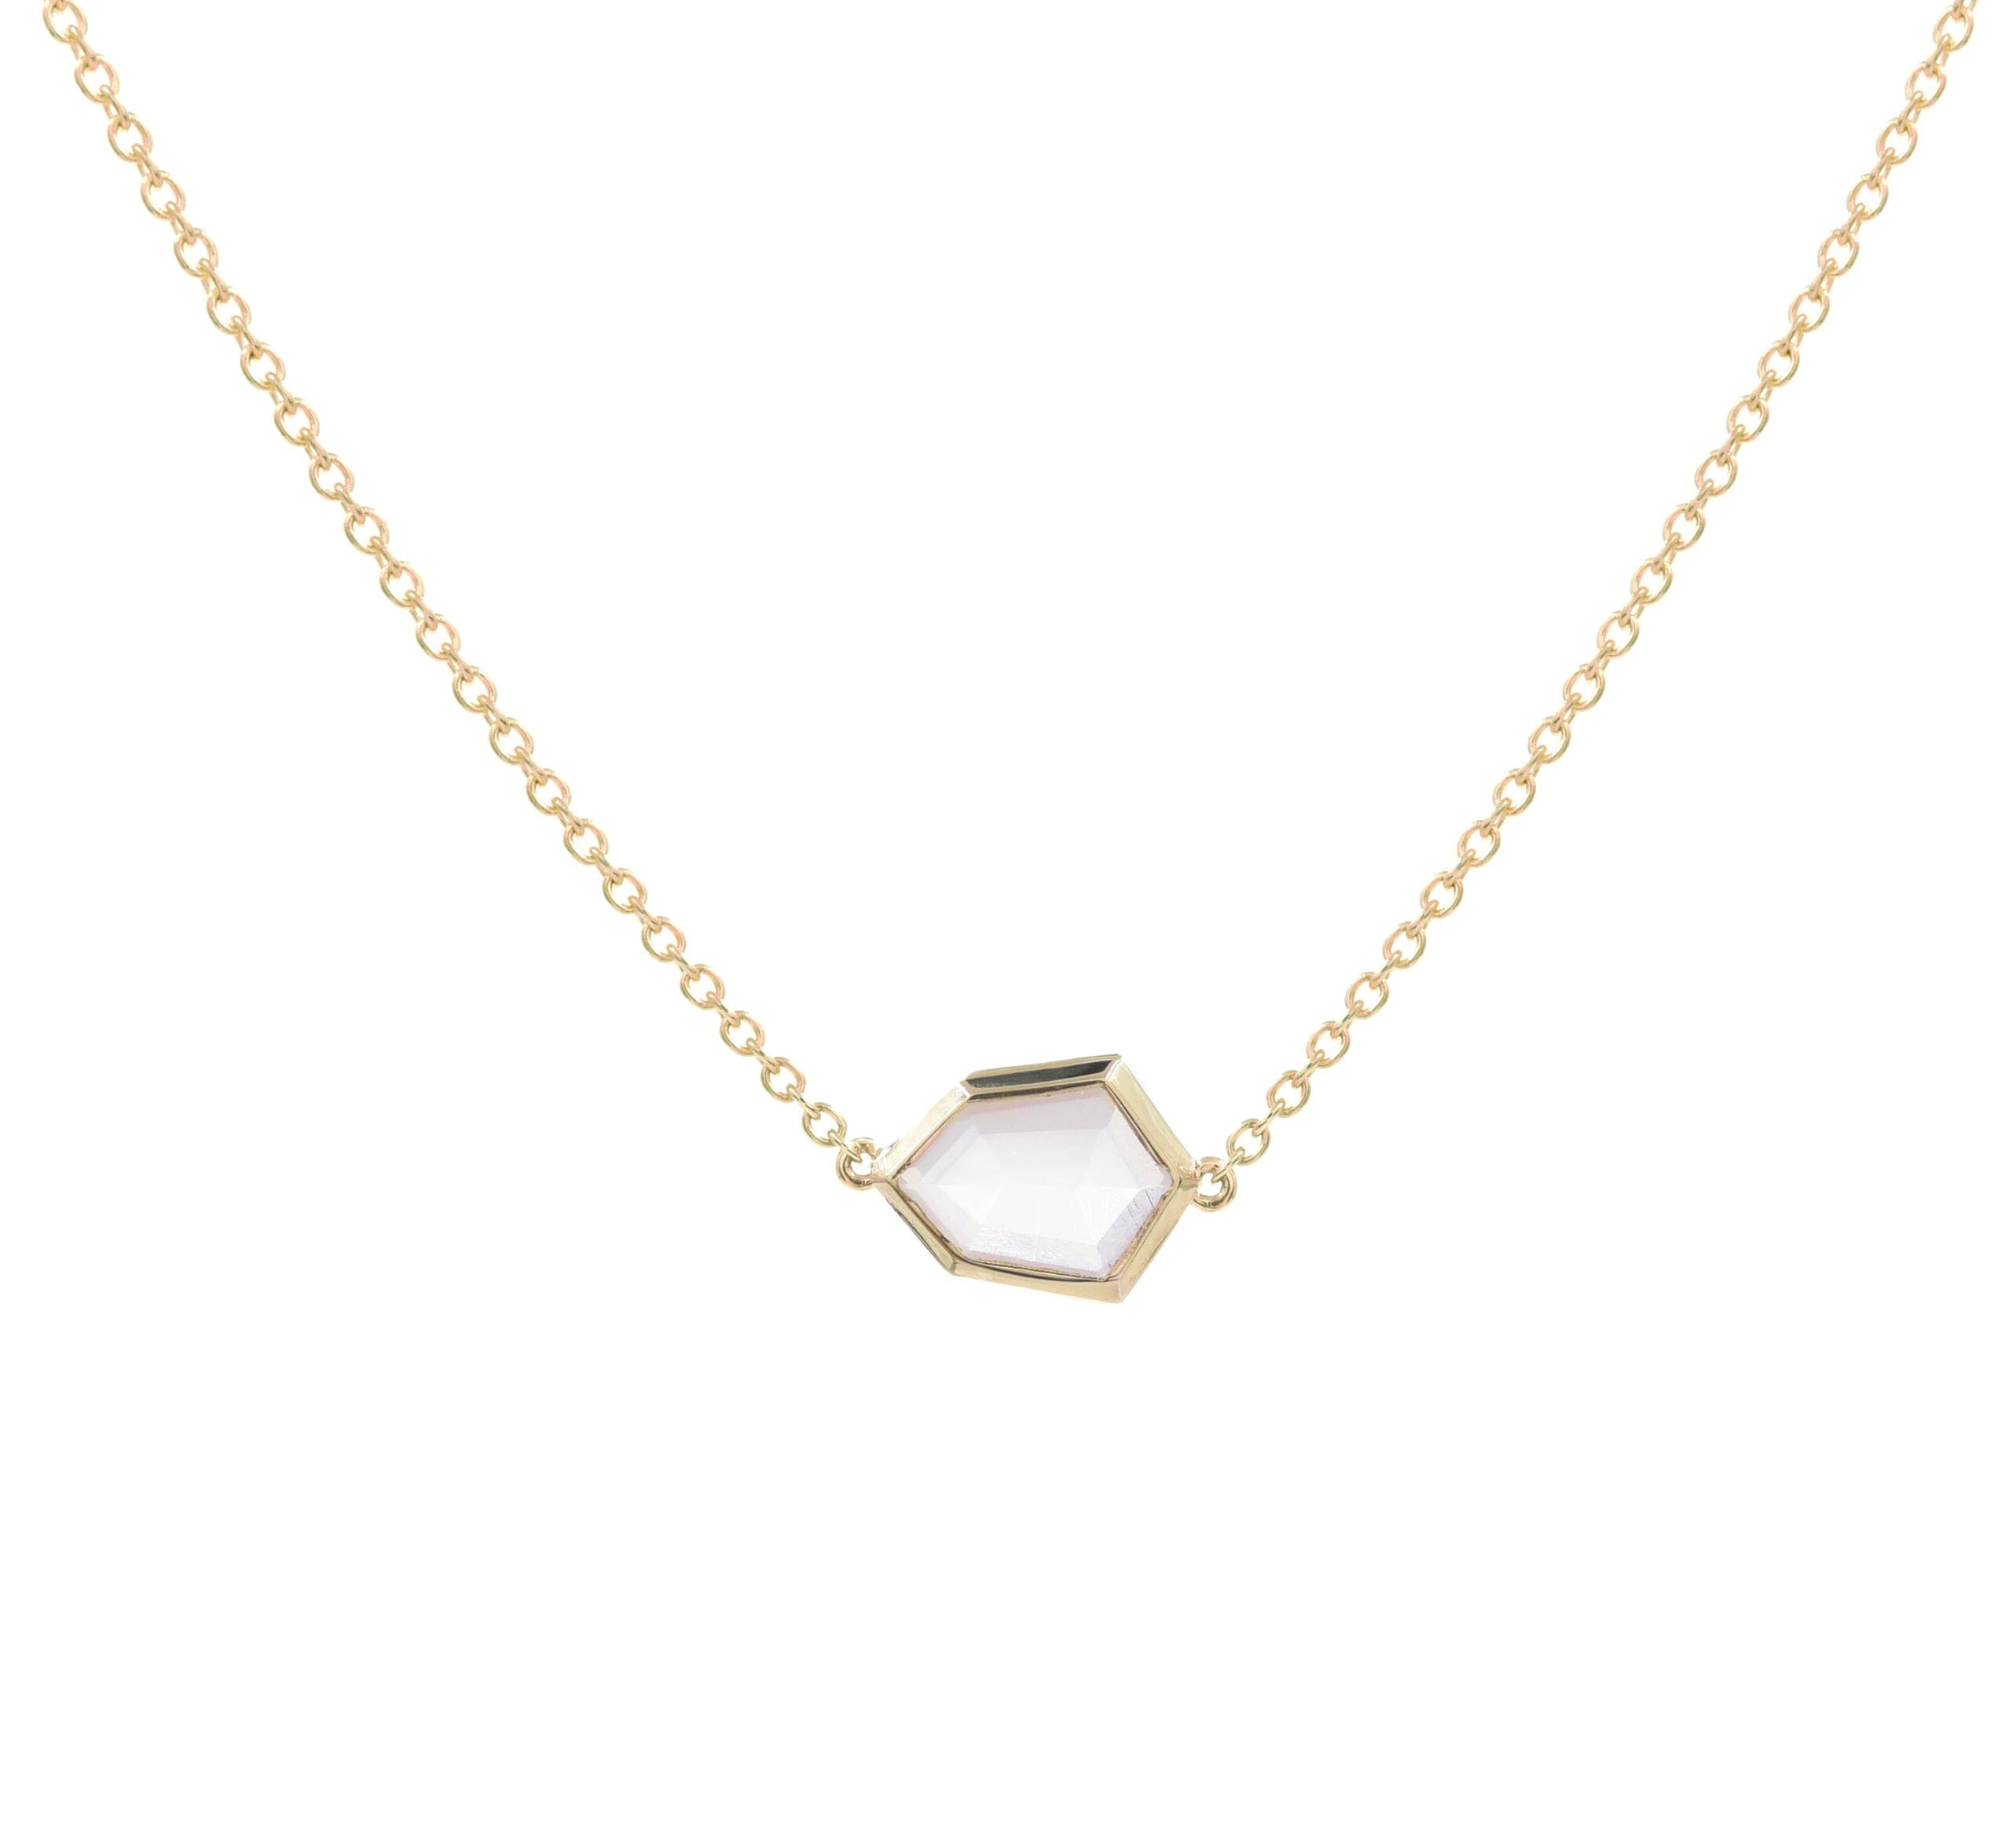 Calming Clear Shield Jollie Necklace Necklaces - BONDEYE JEWELRY ®